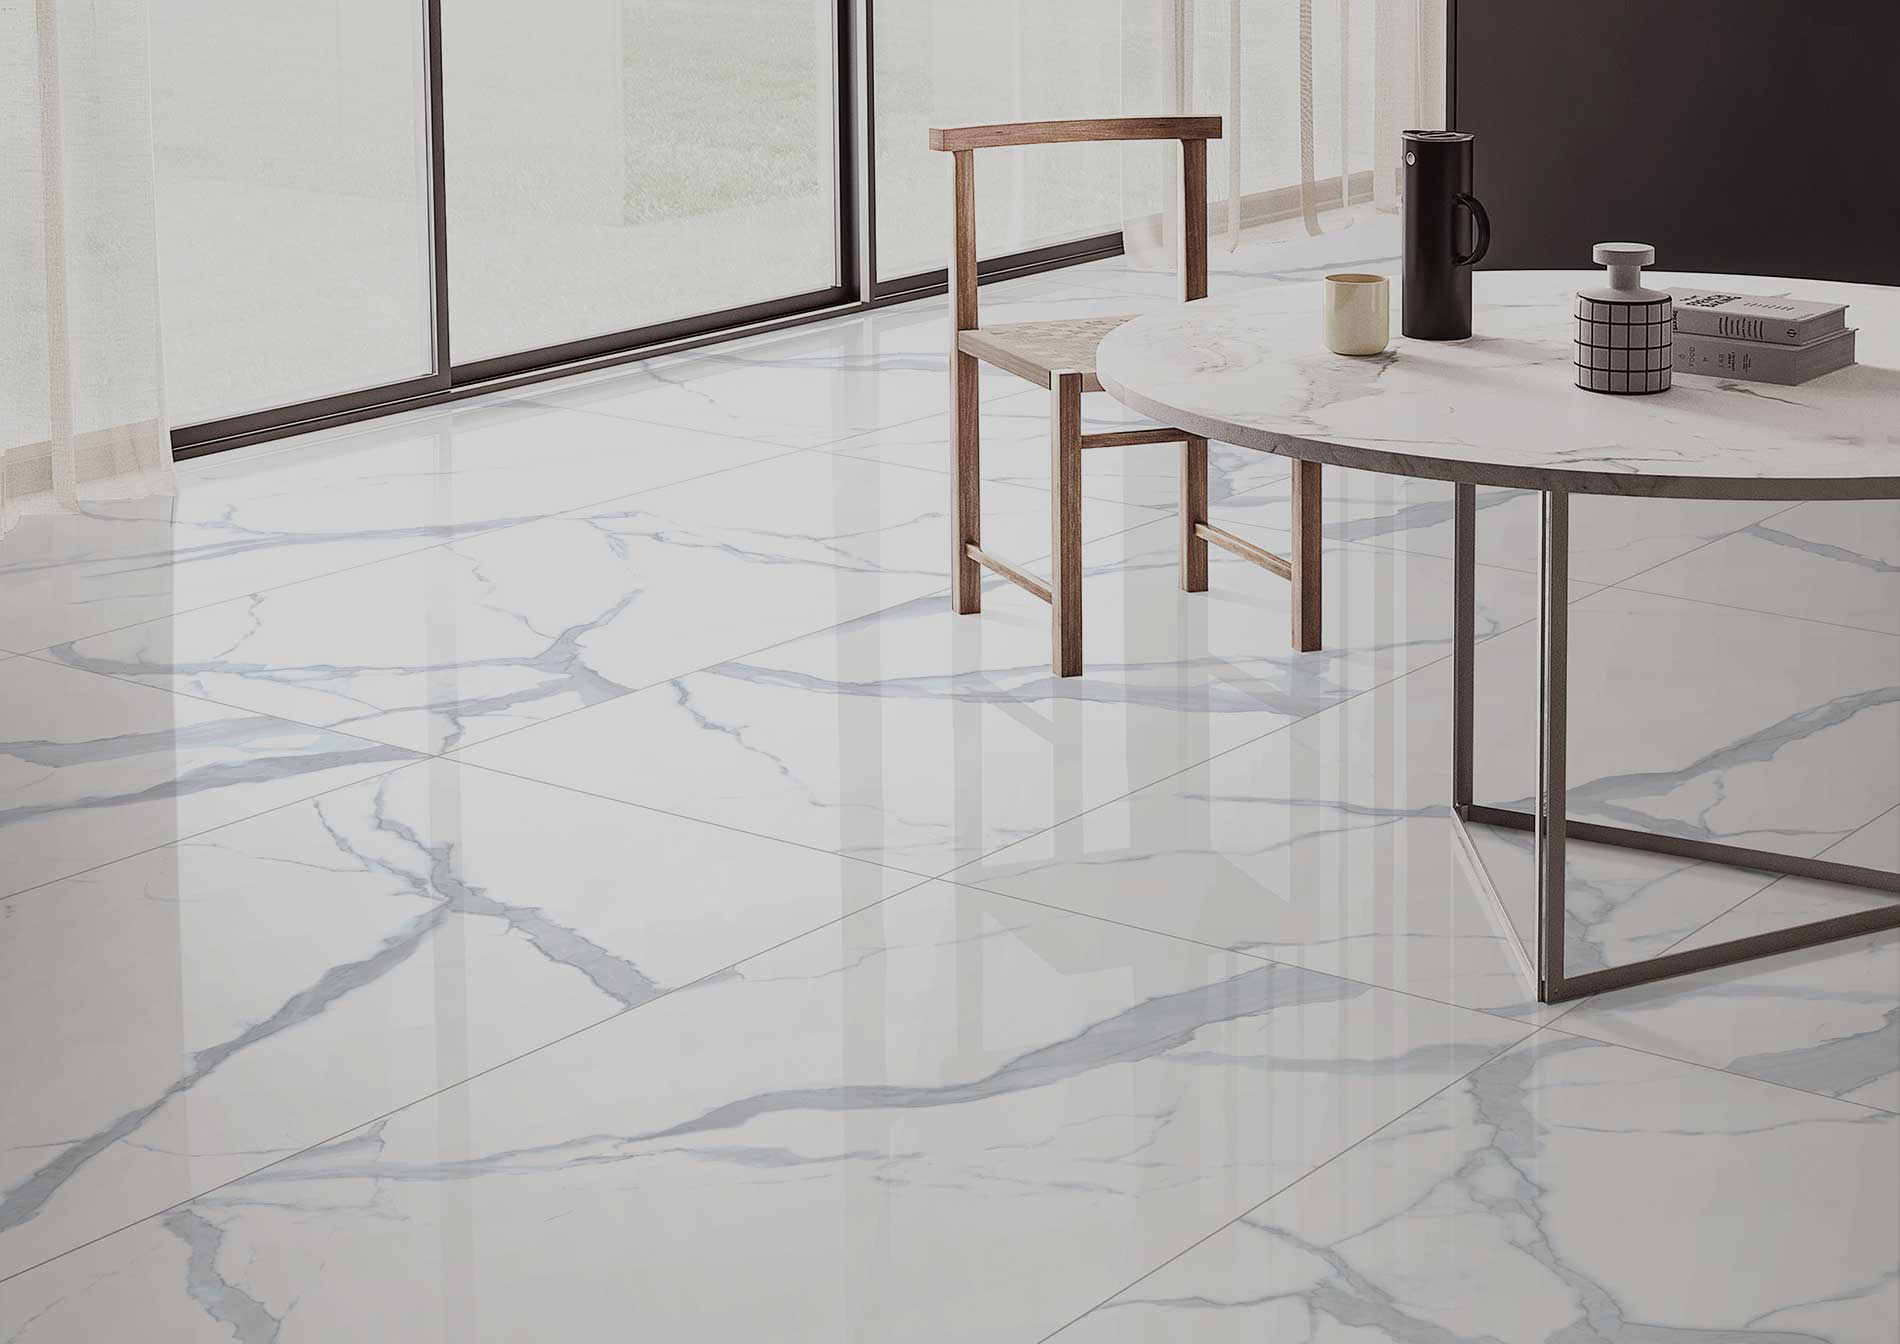 How to choose the right porcelain tile?